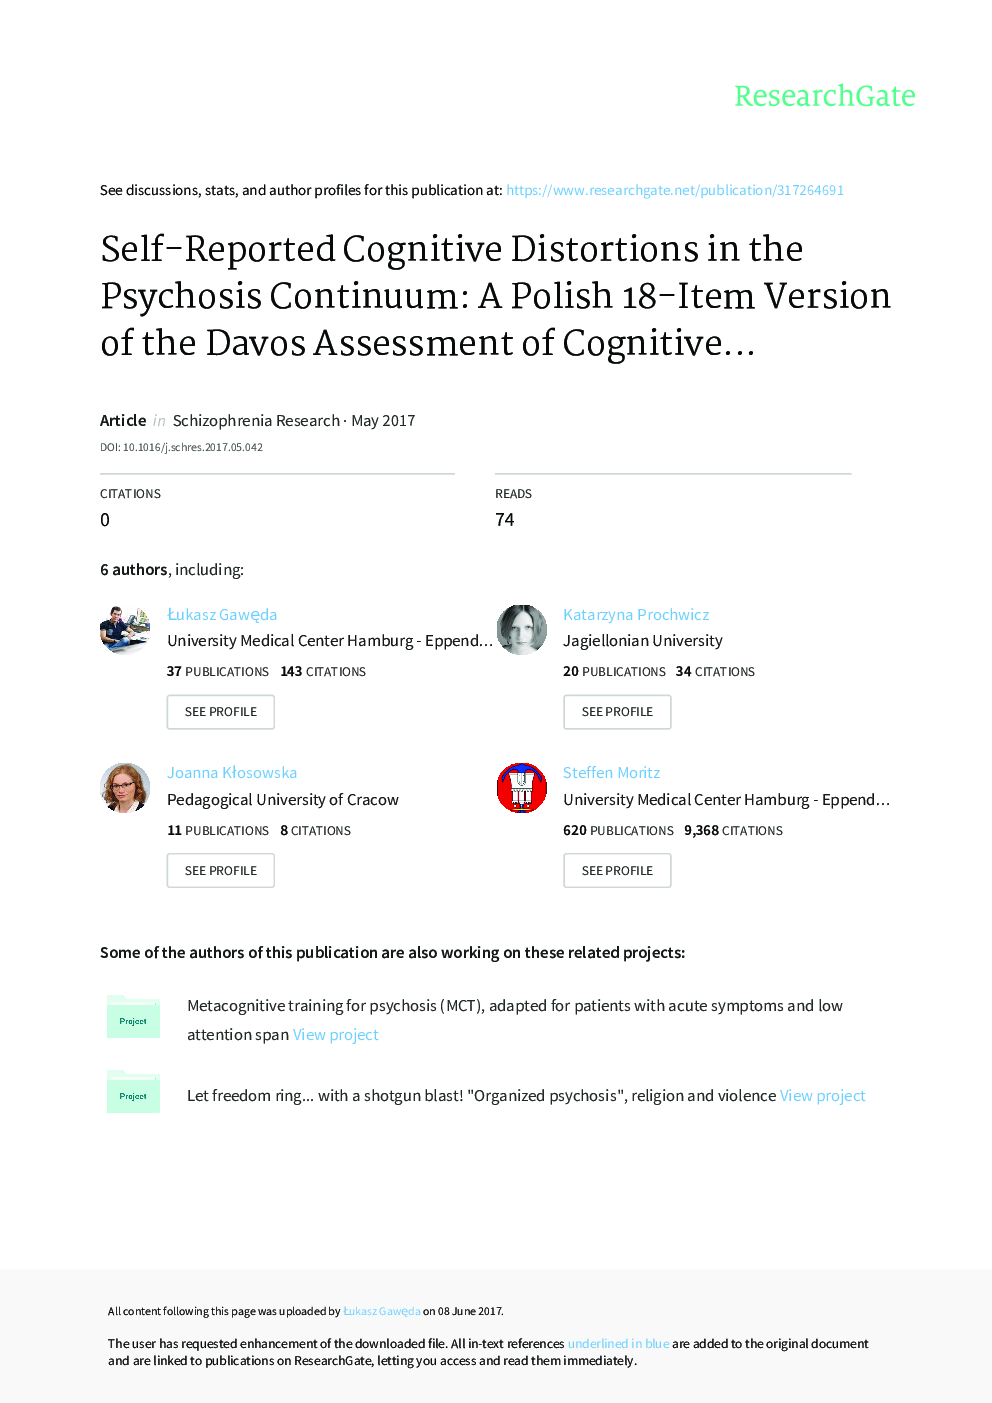 Self-reported cognitive distortions in the psychosis continuum: A Polish 18-item version of the Davos Assessment of Cognitive Biases Scale (DACOBS-18)